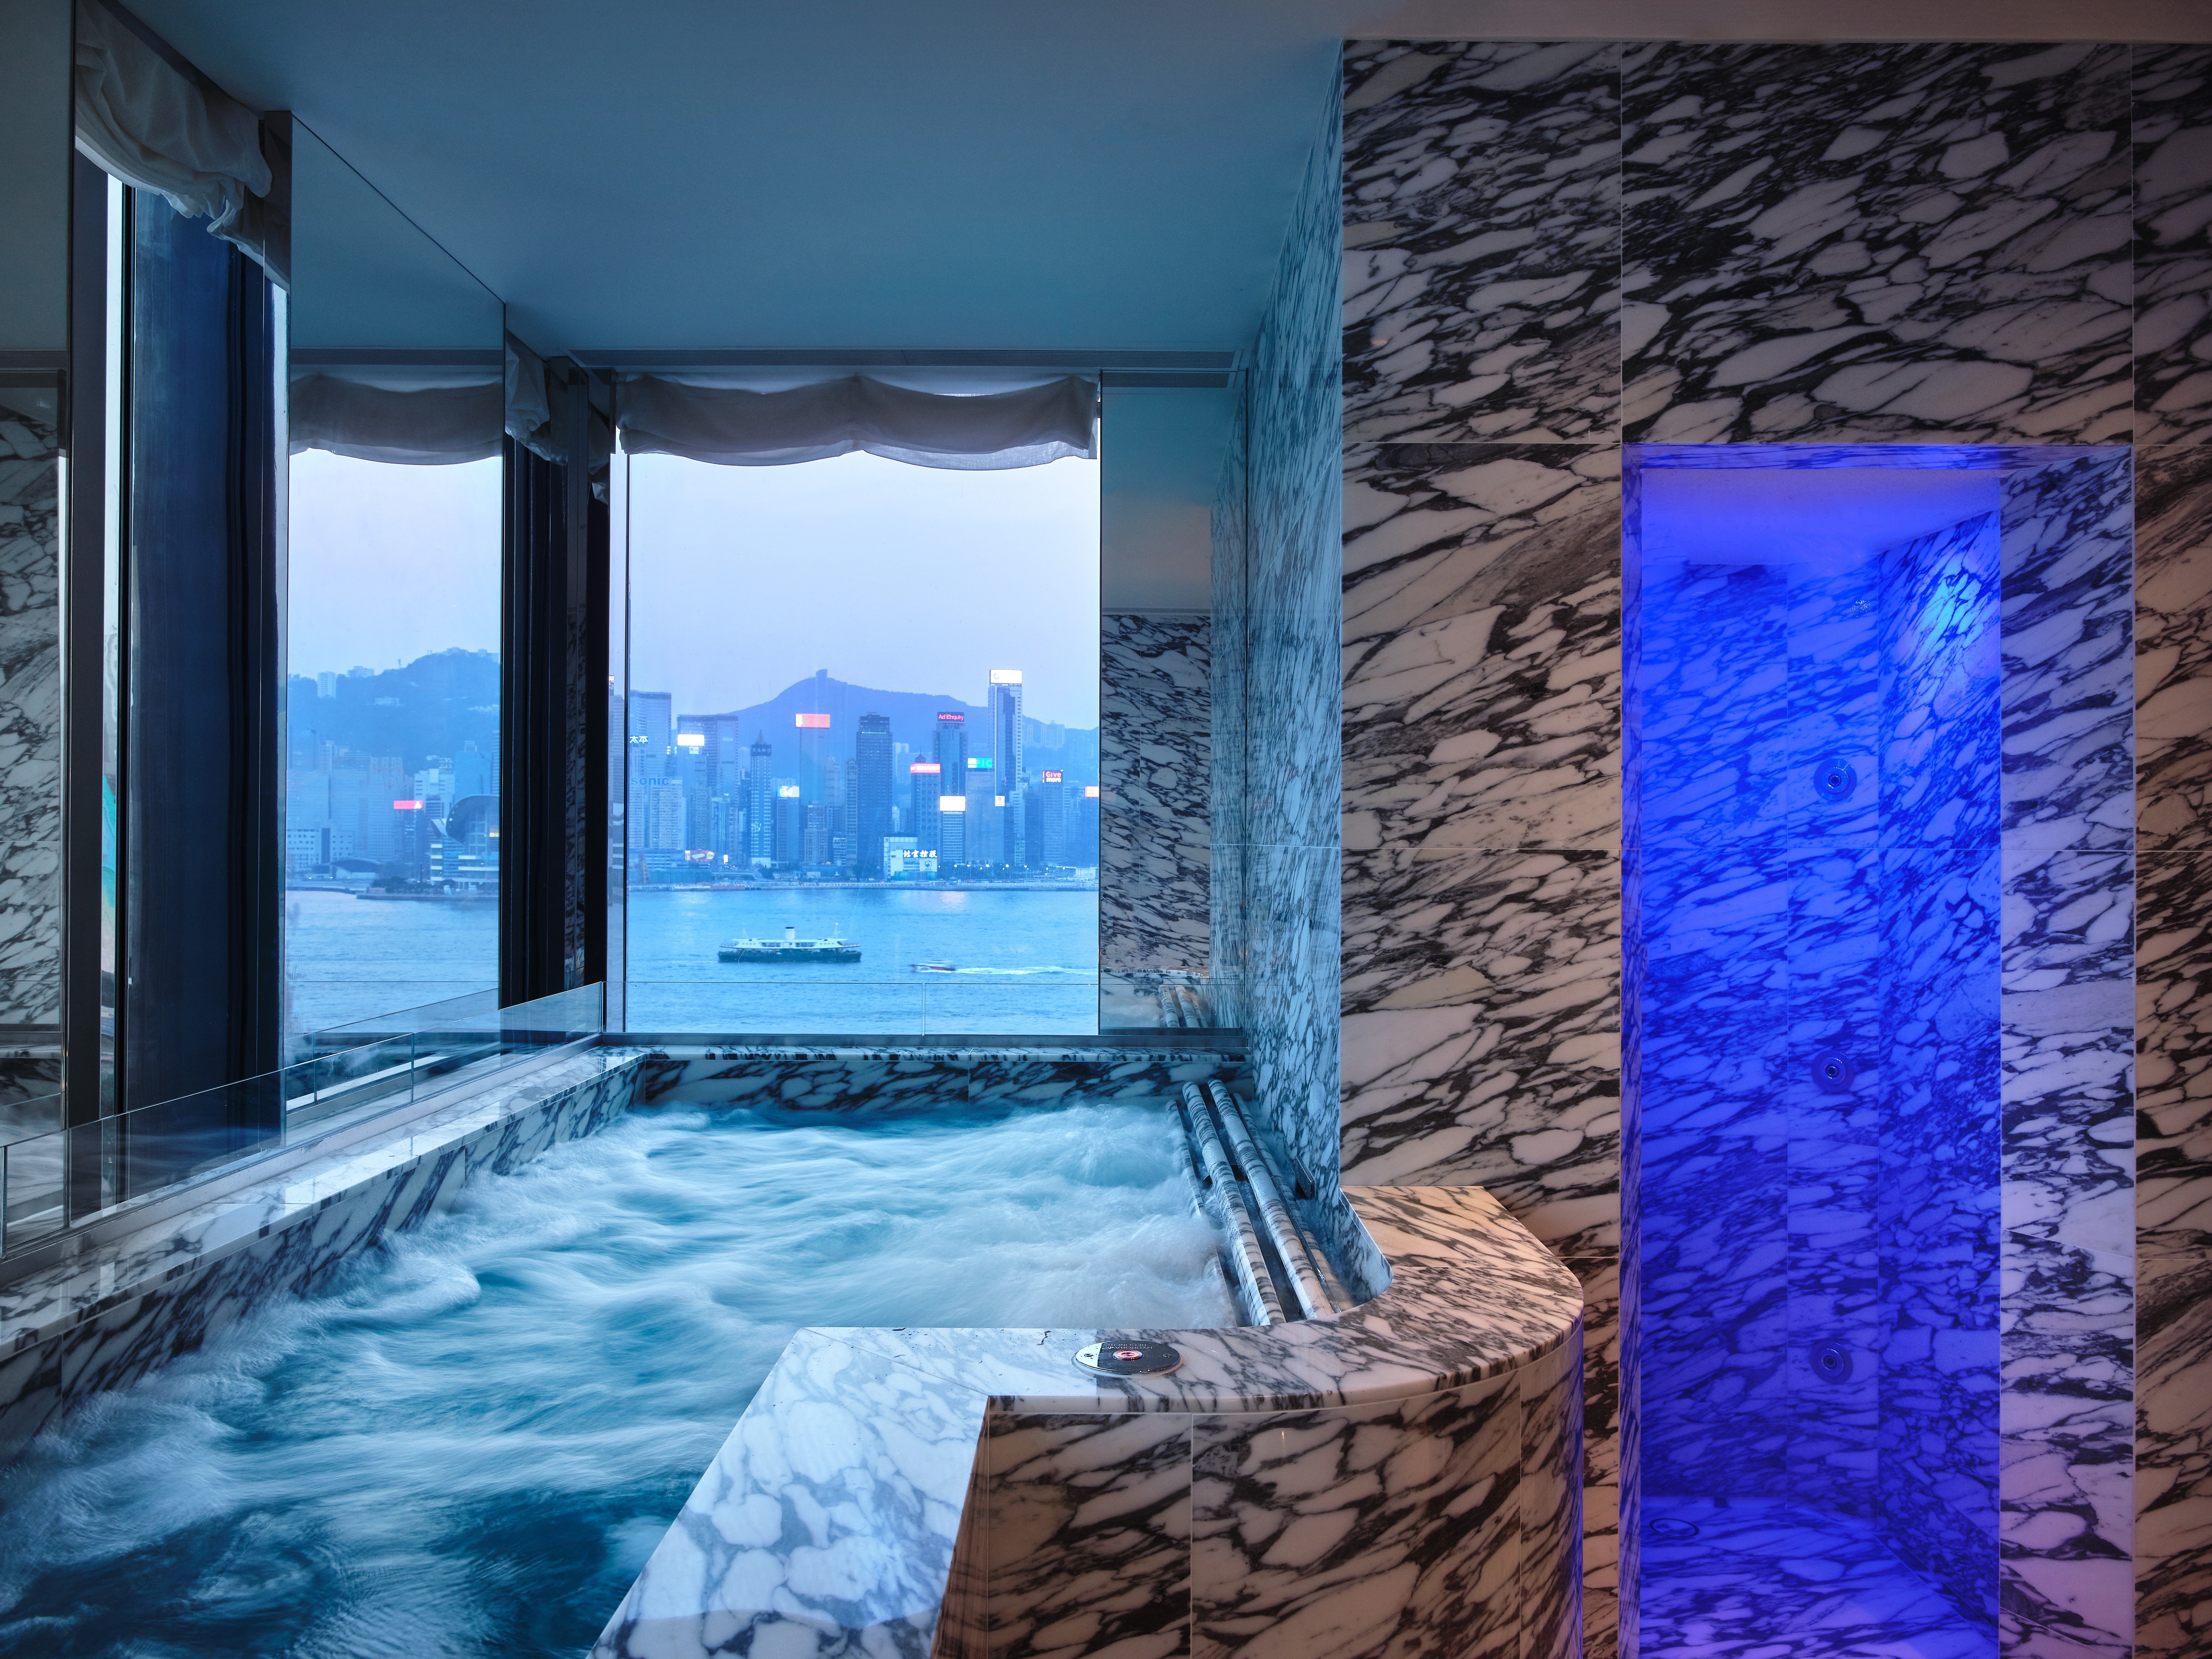 Book a stay at the Rosewood Hong Kong’s new Asaya Lodges retreat and you can enjoy access to the hotel spa's hydrotherapy rooms. Photo: Rosewood Hong Kong